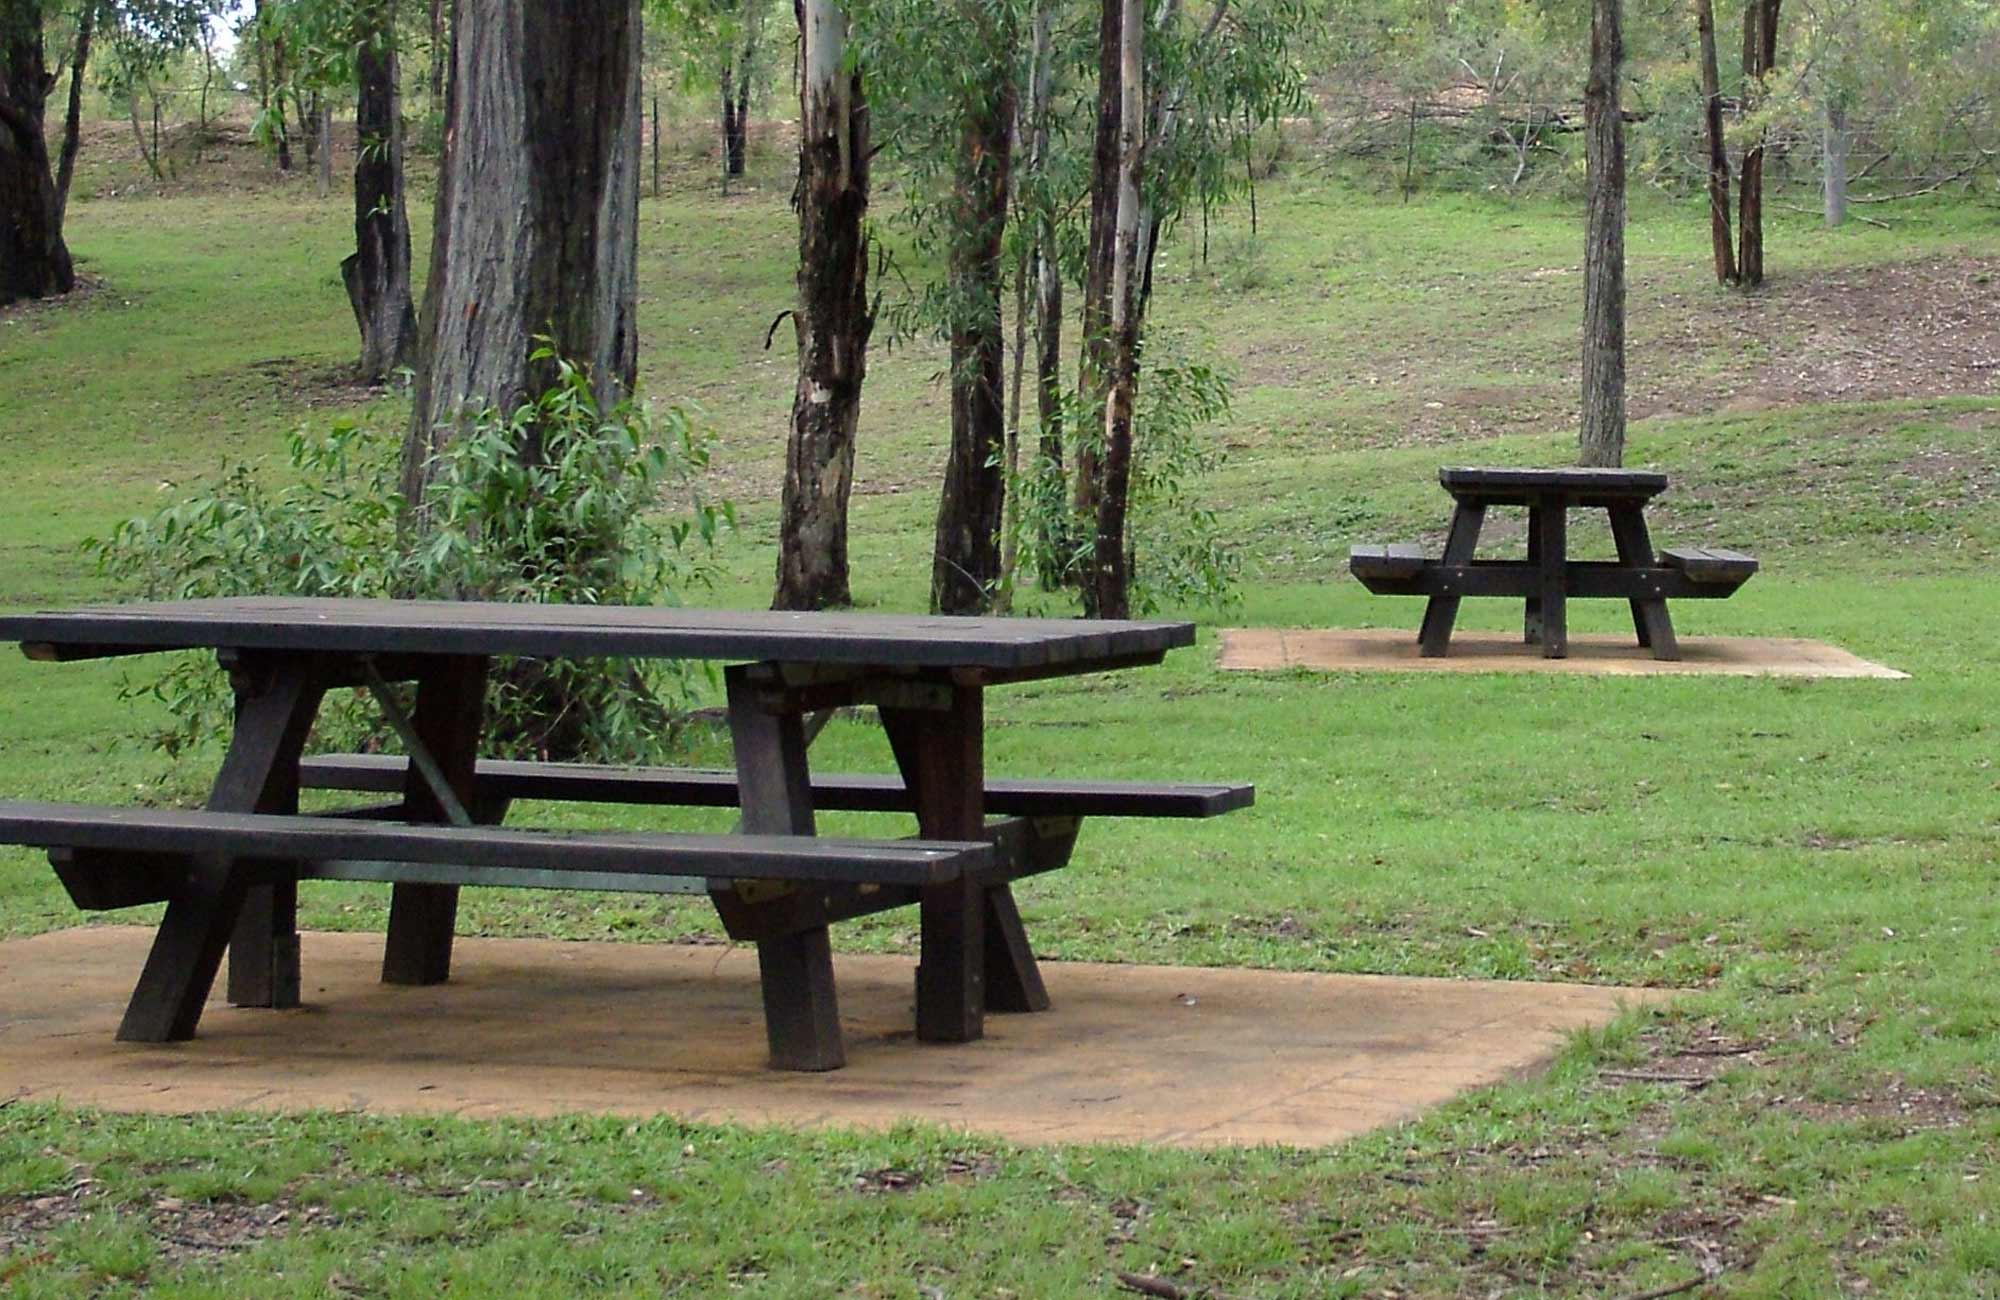 Washpool picnic Area and viewing platform, Towarri National Park. Photo: NSW Government